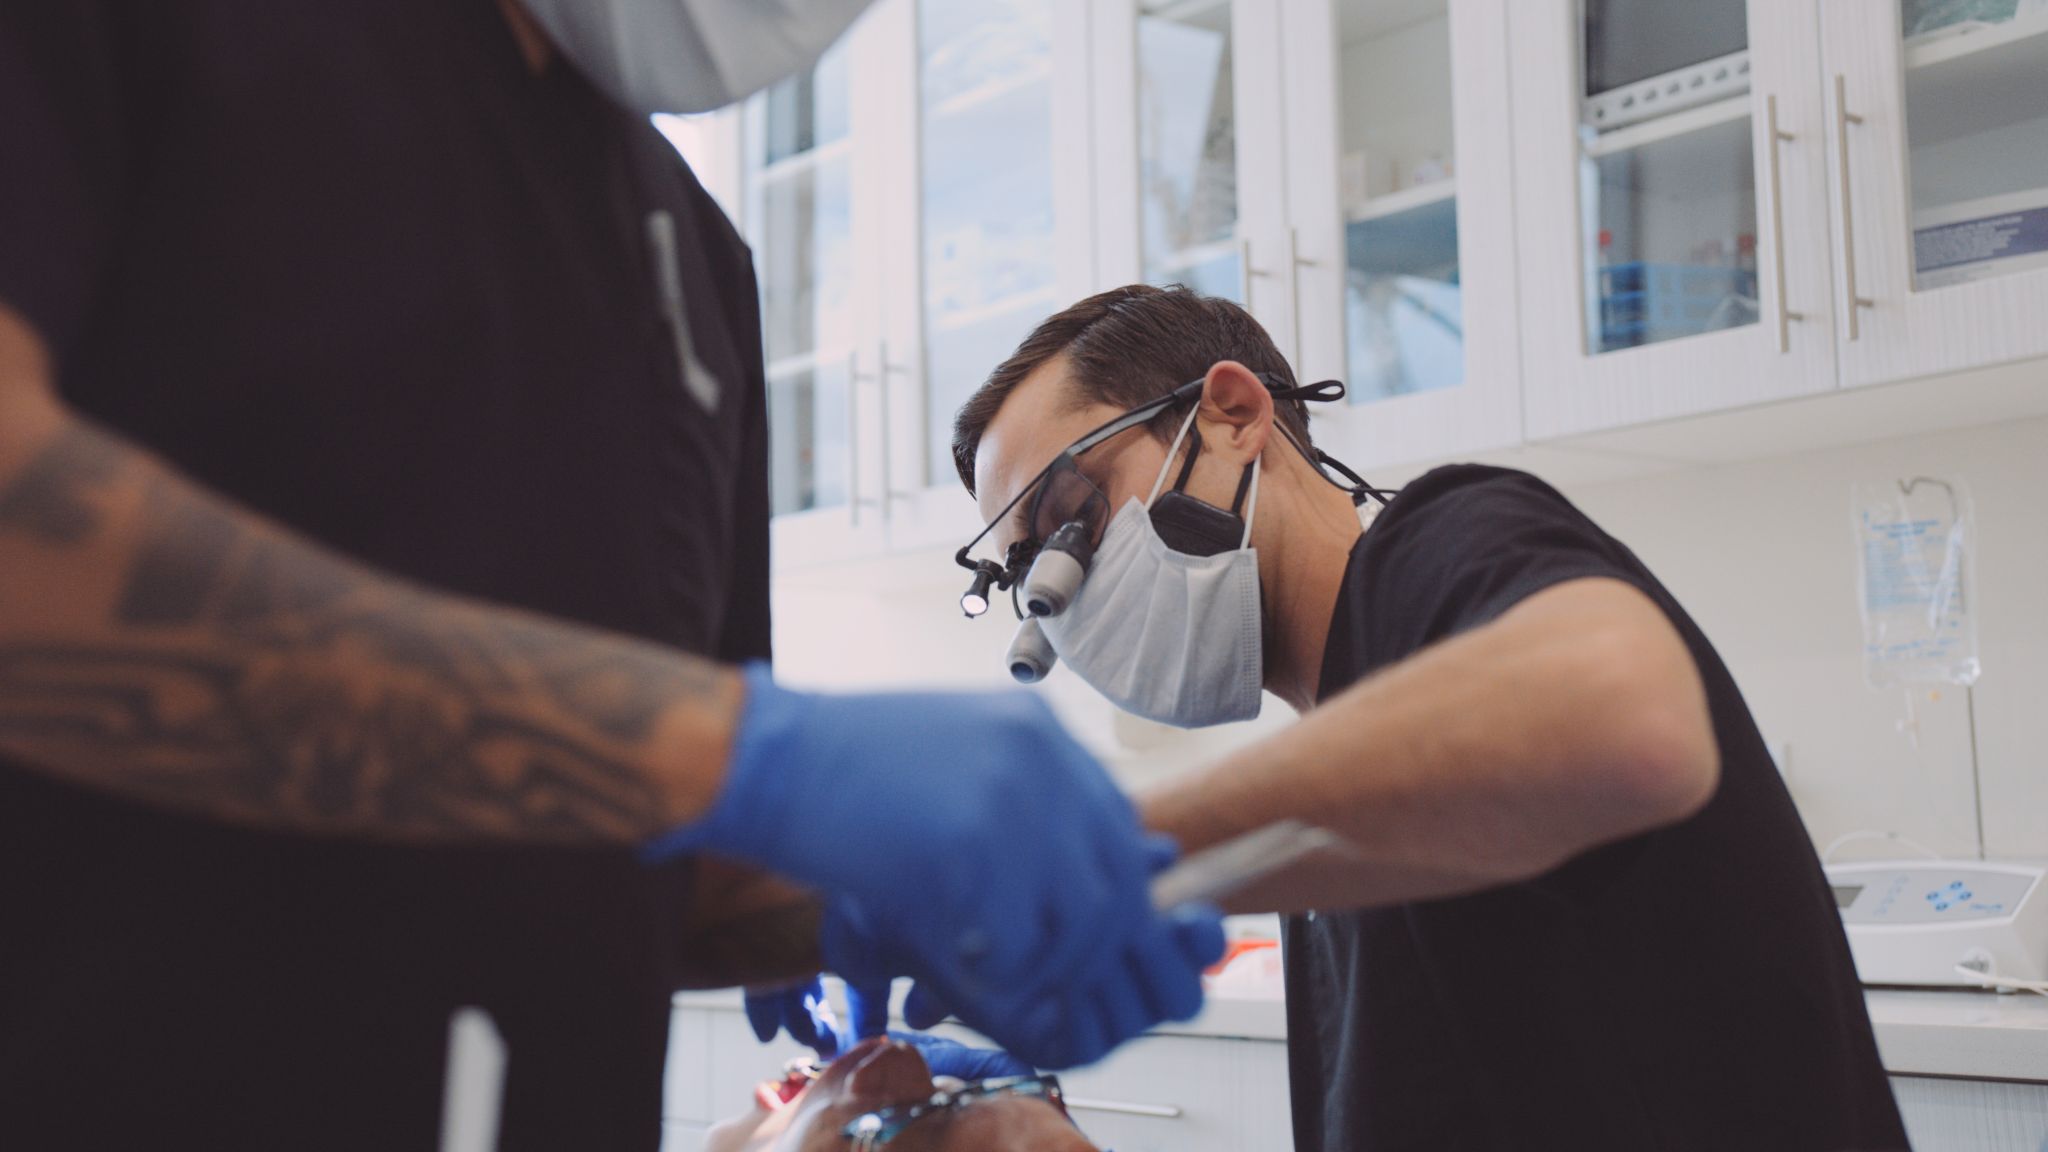 Male dentist working on teeth while male assistant gets equipment